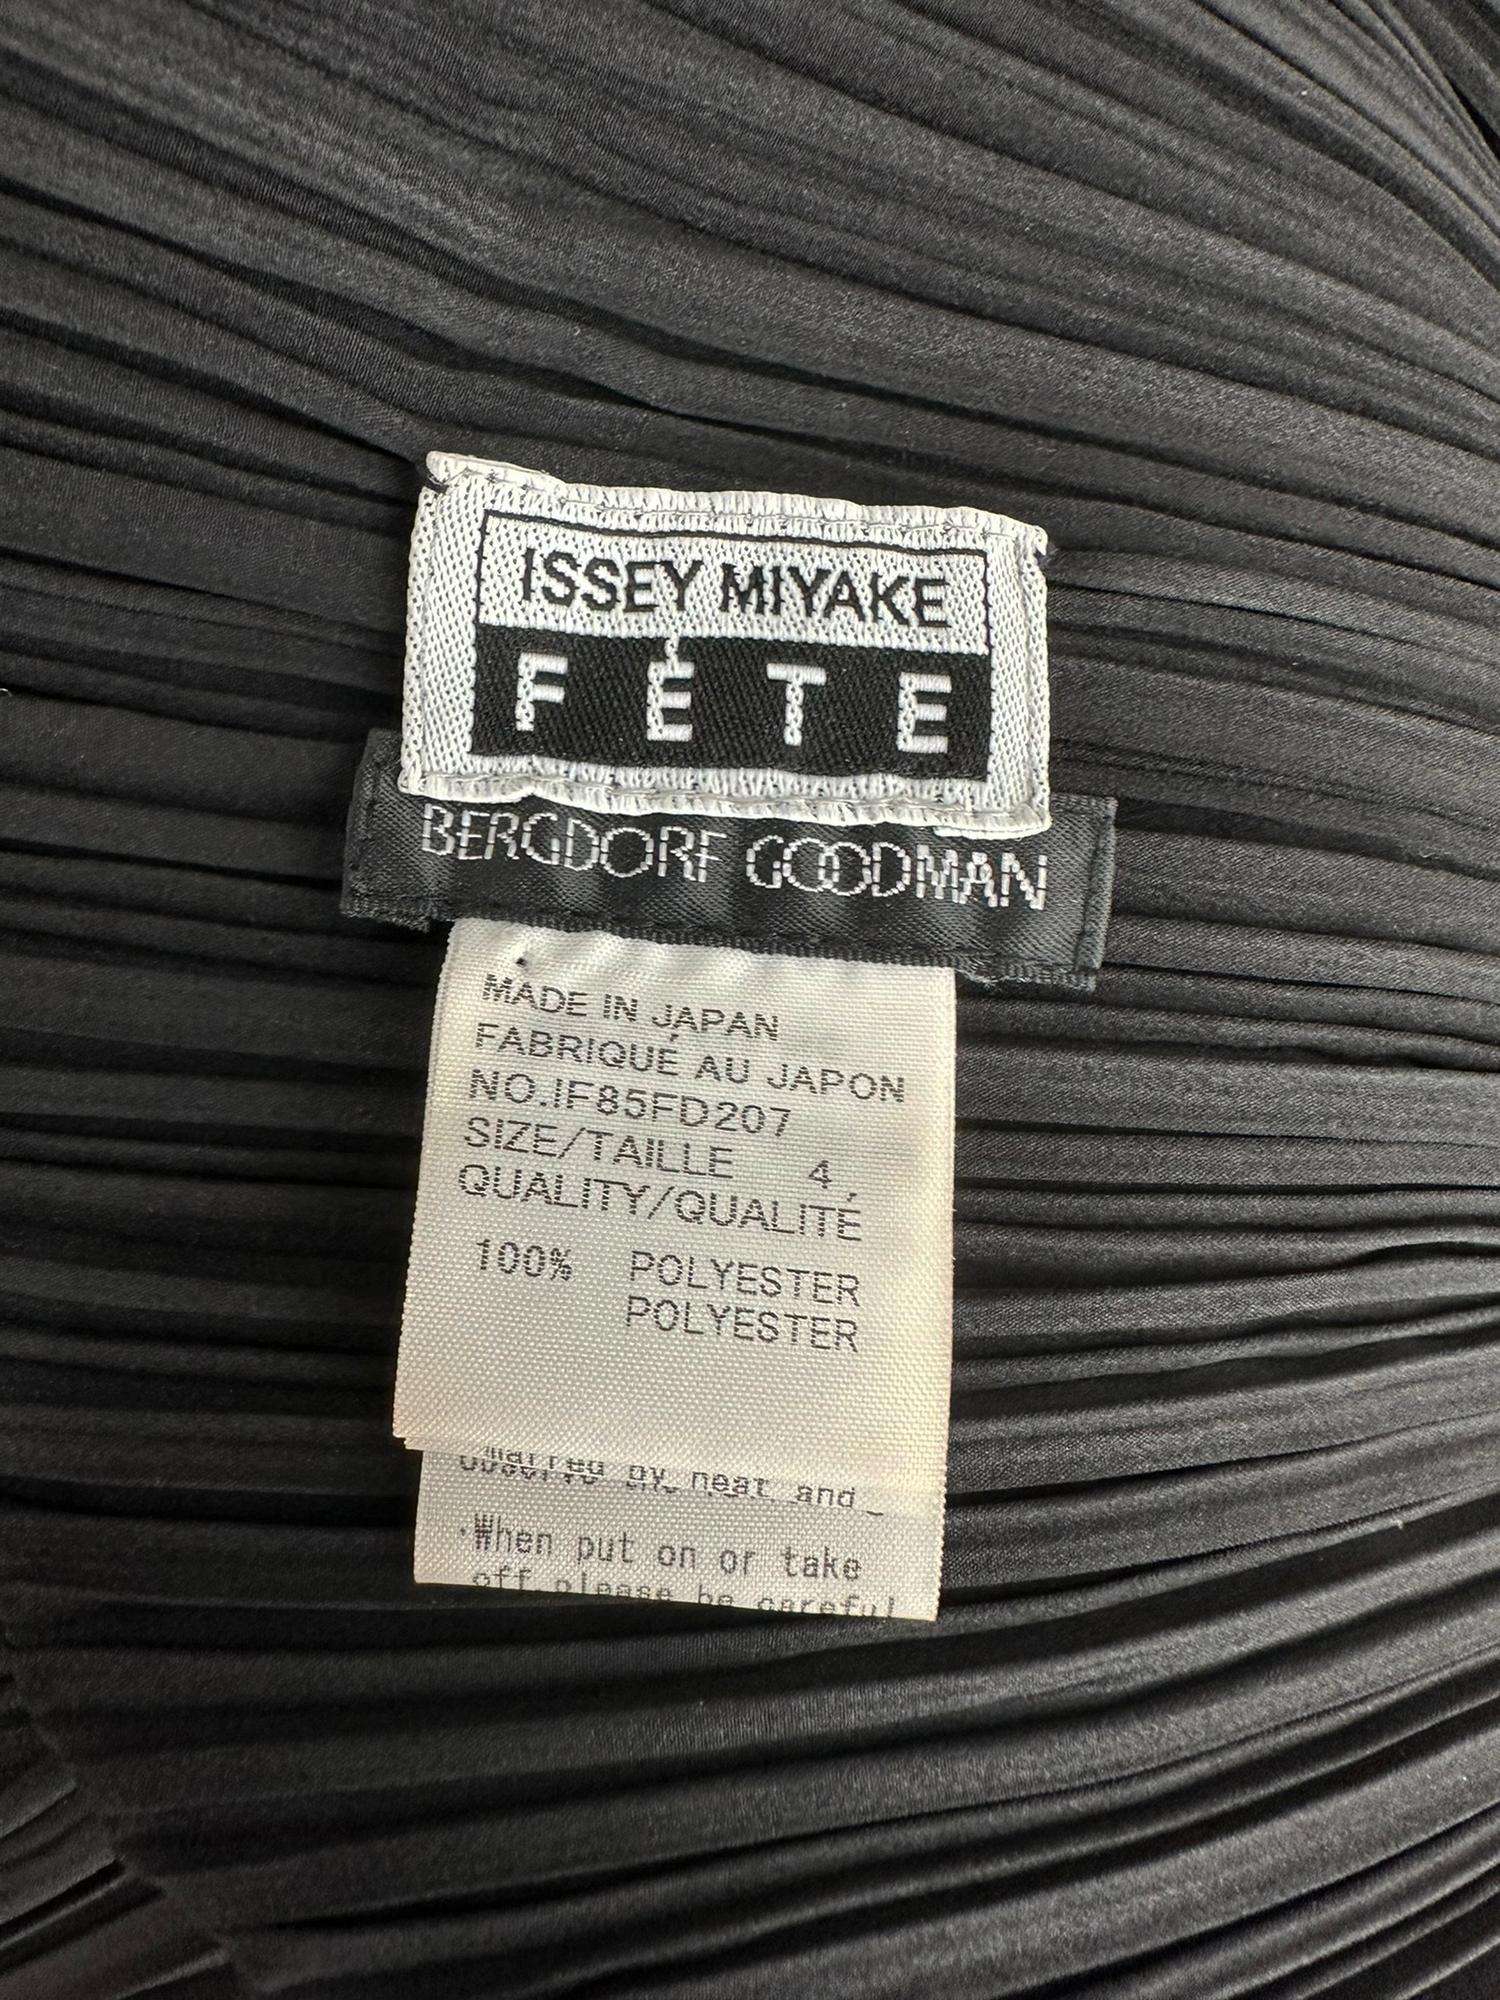 Issey Miyake Fete 2pc Jacket & Pant Black Pleats with Open Mesh Insertion Size 4 8